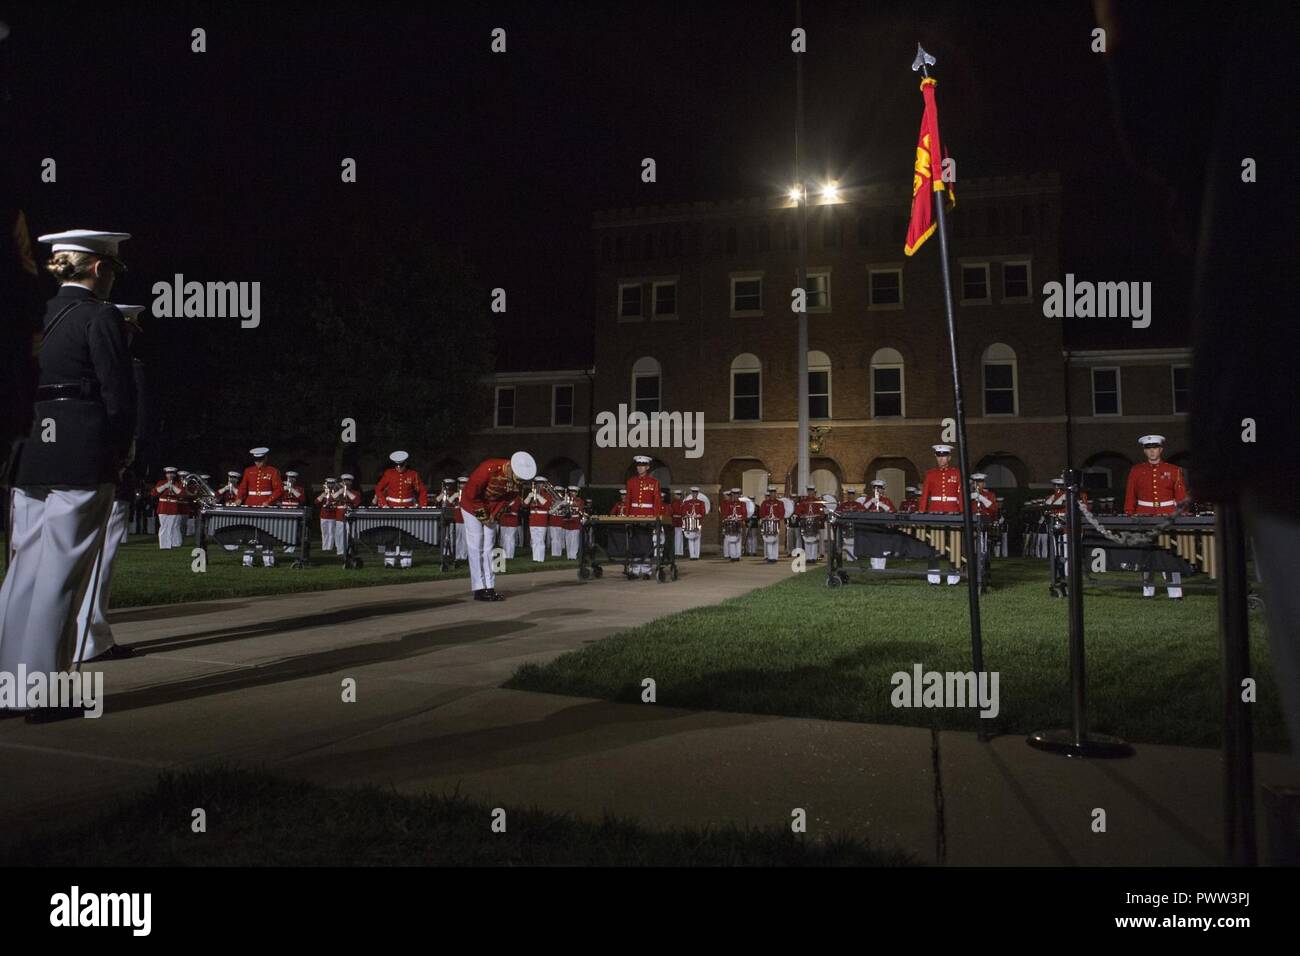 U.S. Marines with the U.S. Marine Drum and Bugle Corps perform during an evening parade at Marine Barracks Washington, Washington, D.C., June 9, 2017. Evening parades are held as a means of honoring senior officials, distinguished citizens and supporters of the Marine Corps. Stock Photo